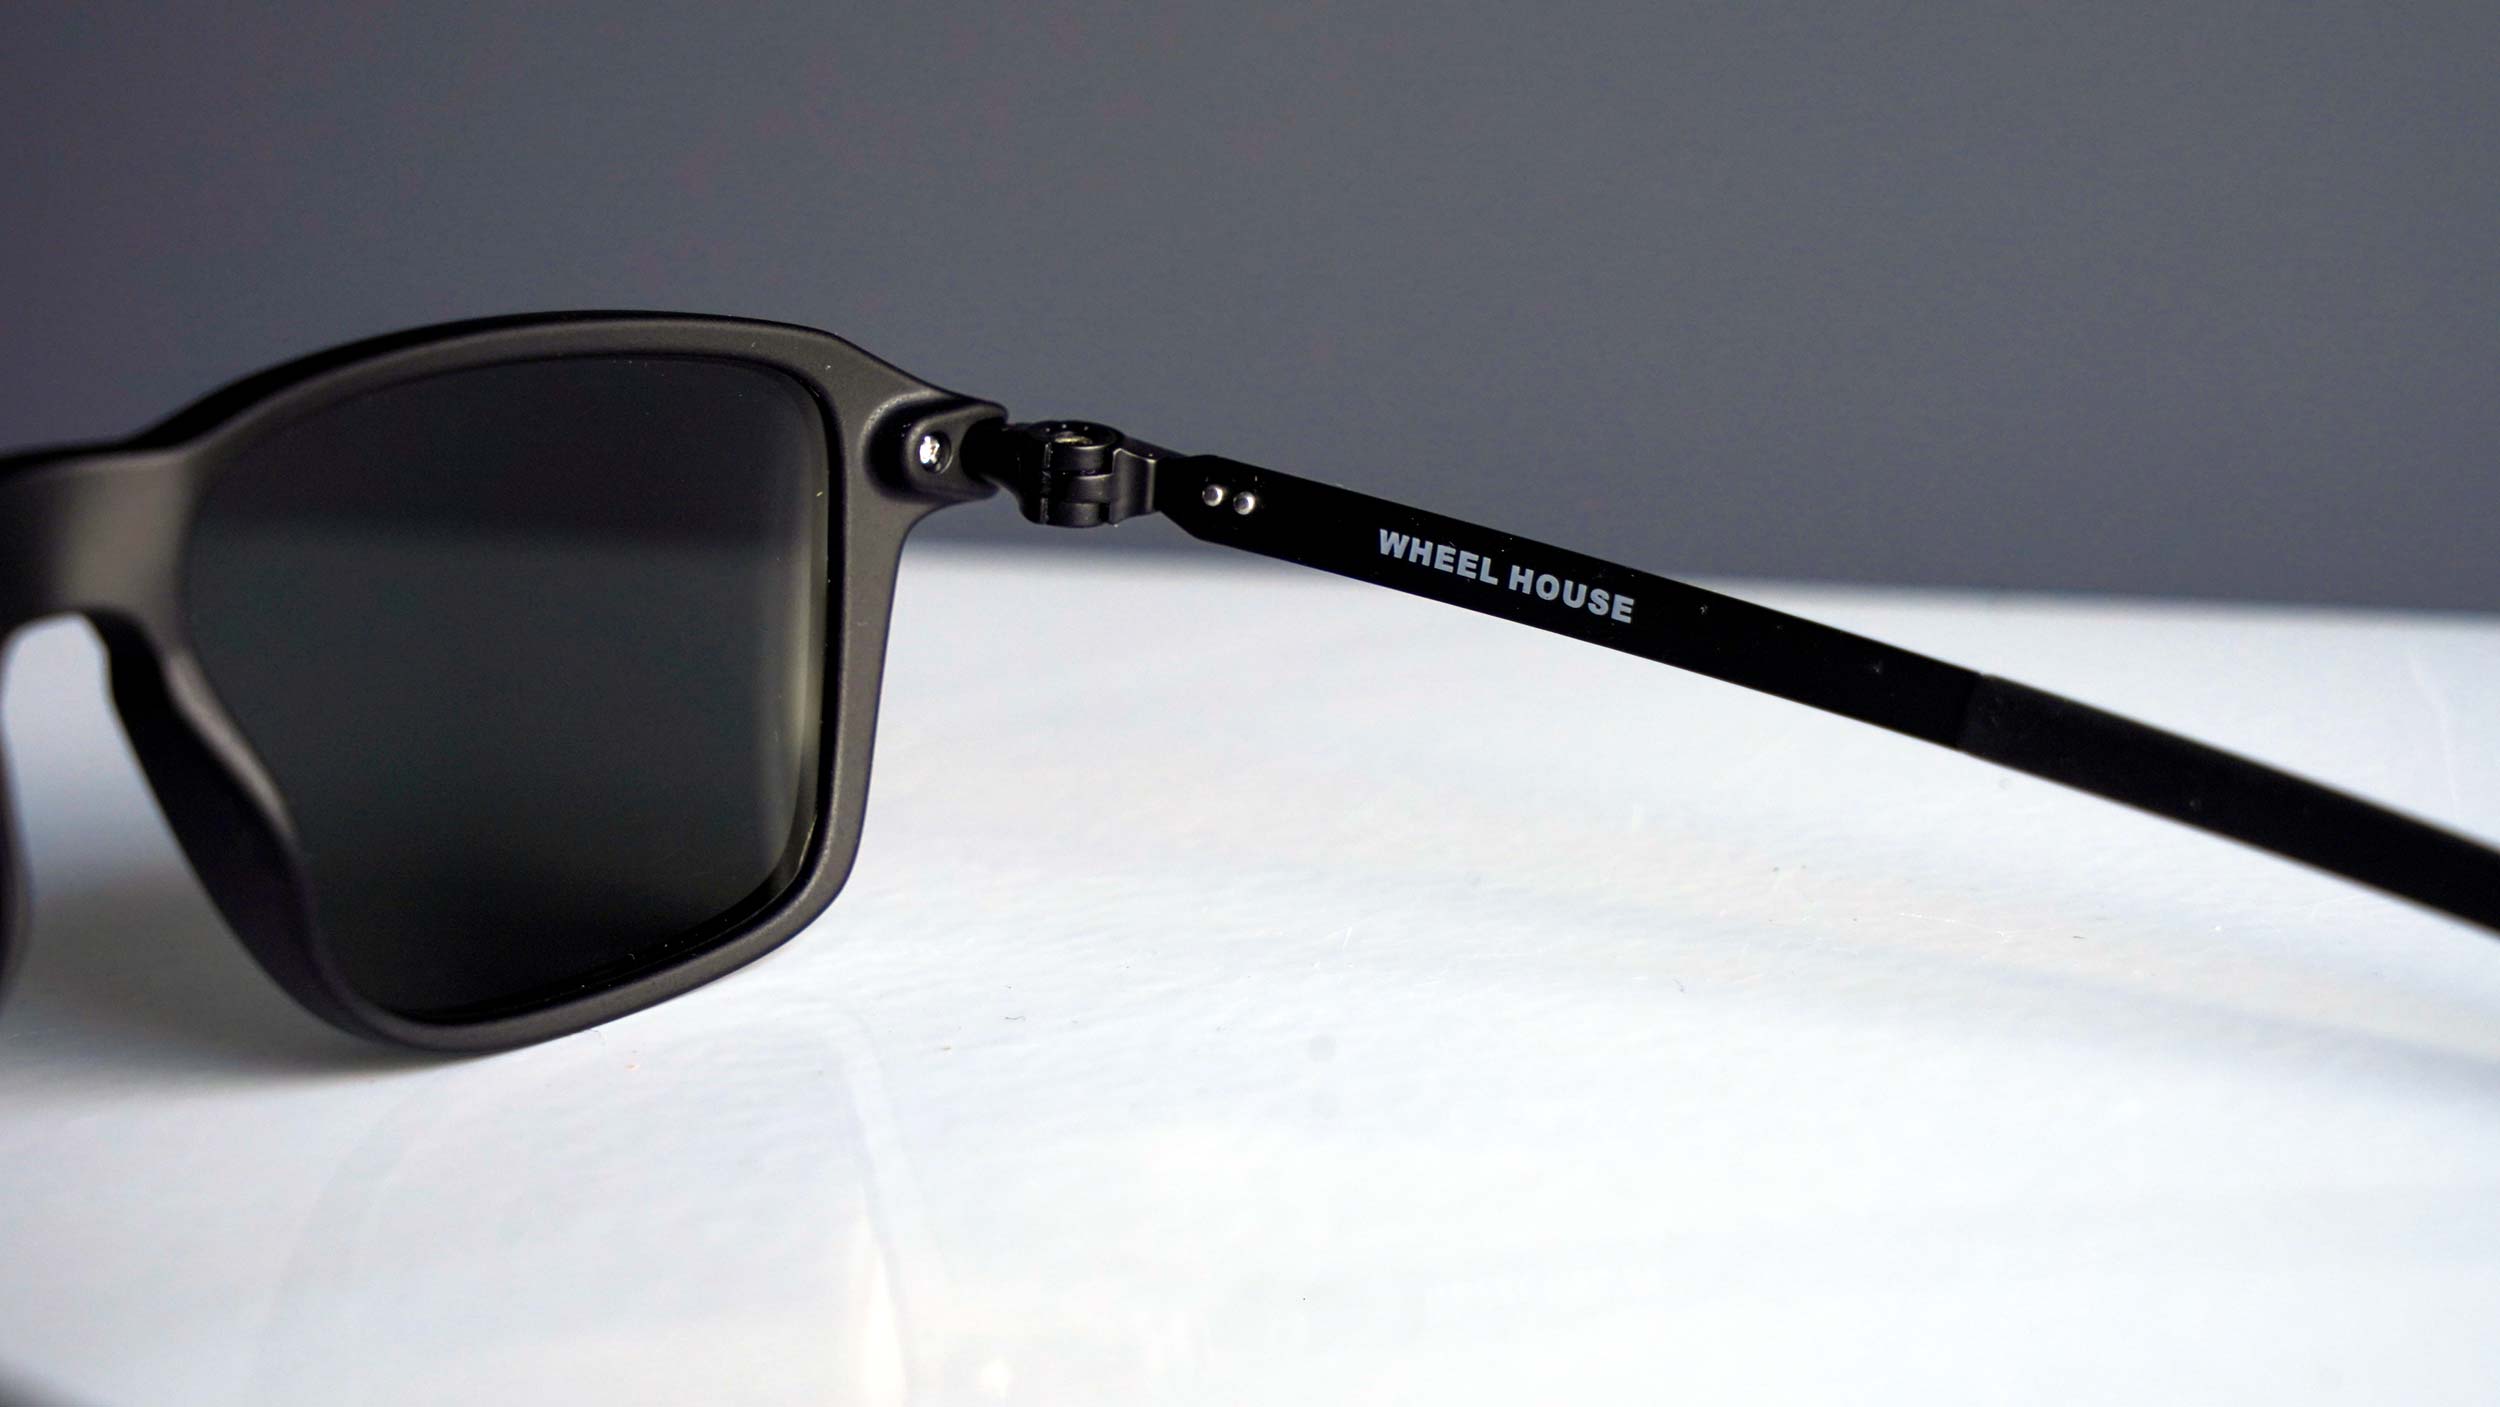 Oakley's 'Wheel House' sunglasses – part of the new summer collection -  Ride Media